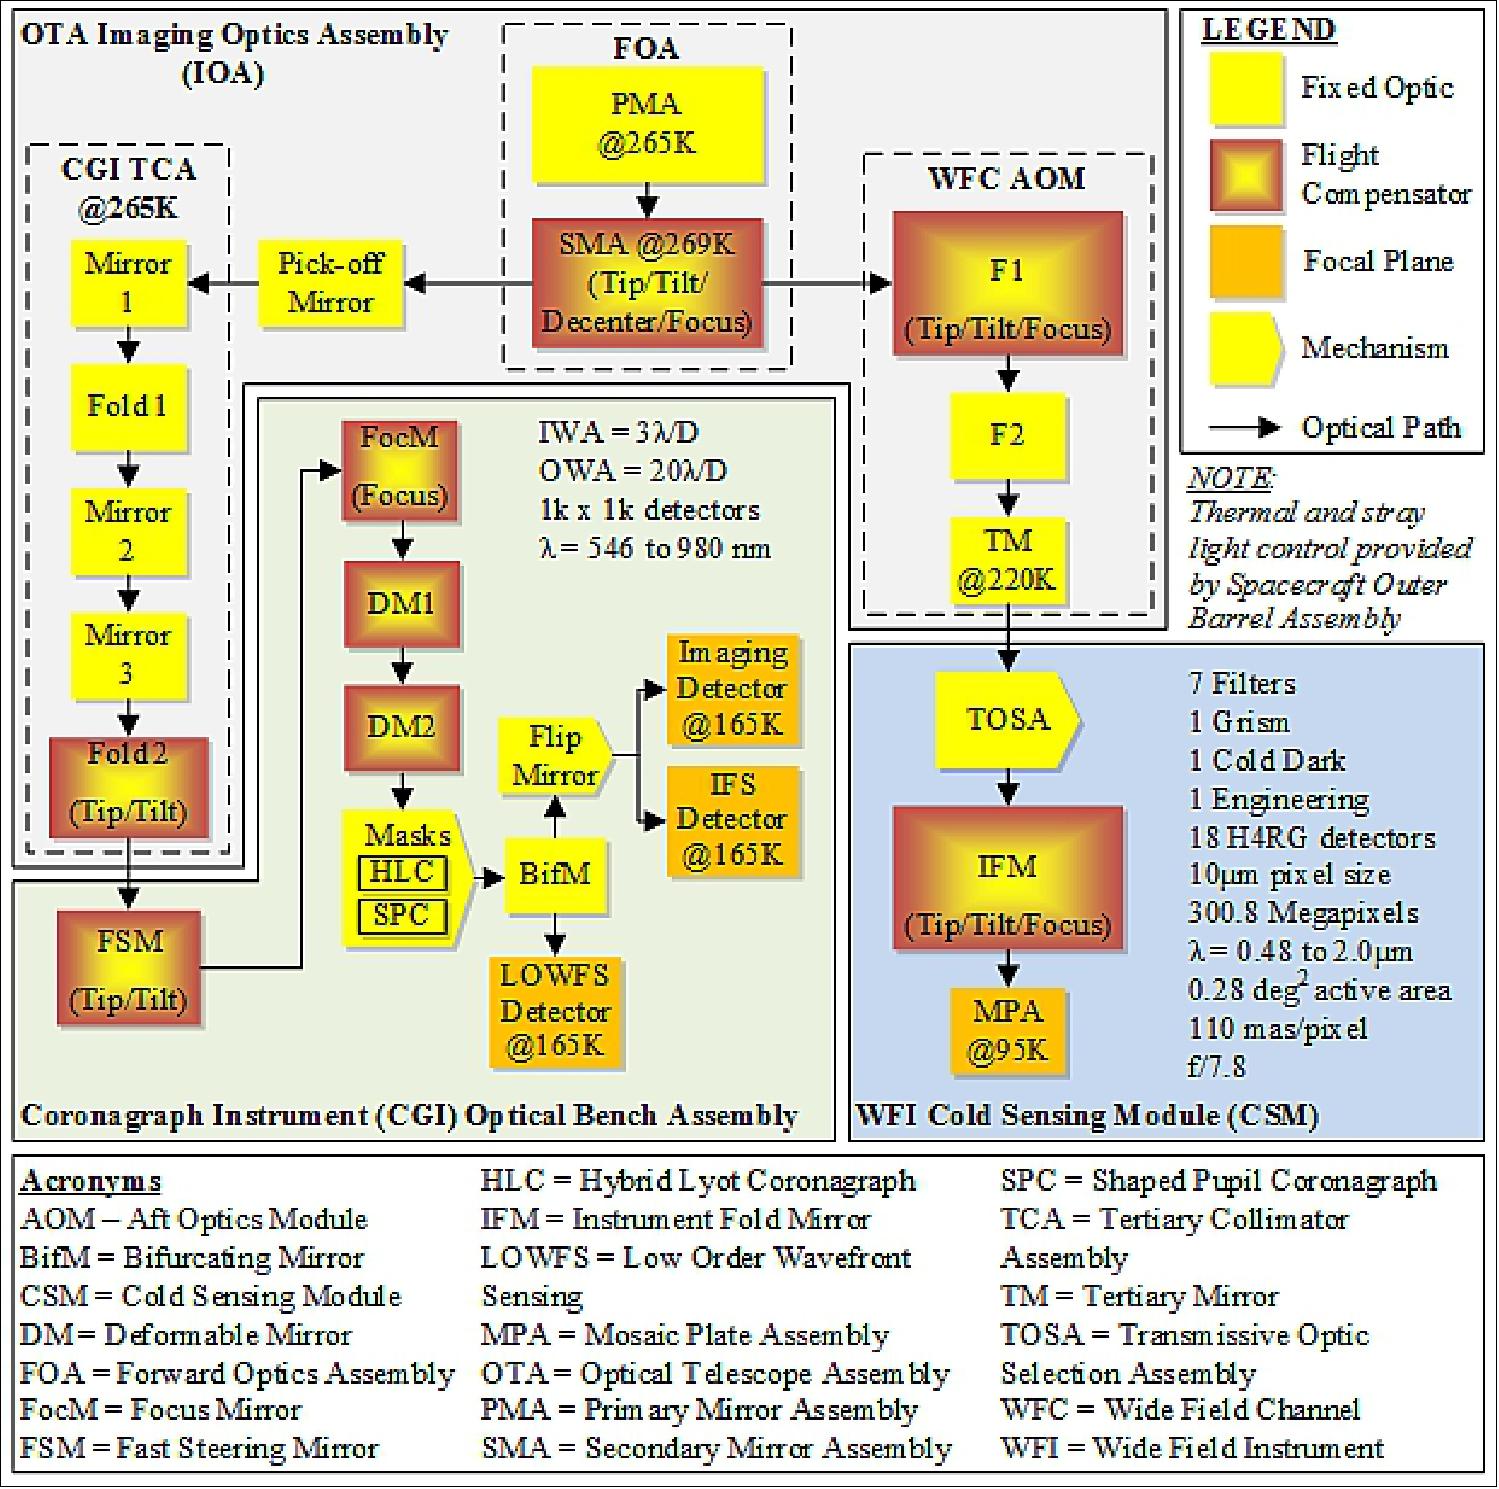 Figure 44: WFIRST payload functional block diagram (image credit: WFIRST collaboration)